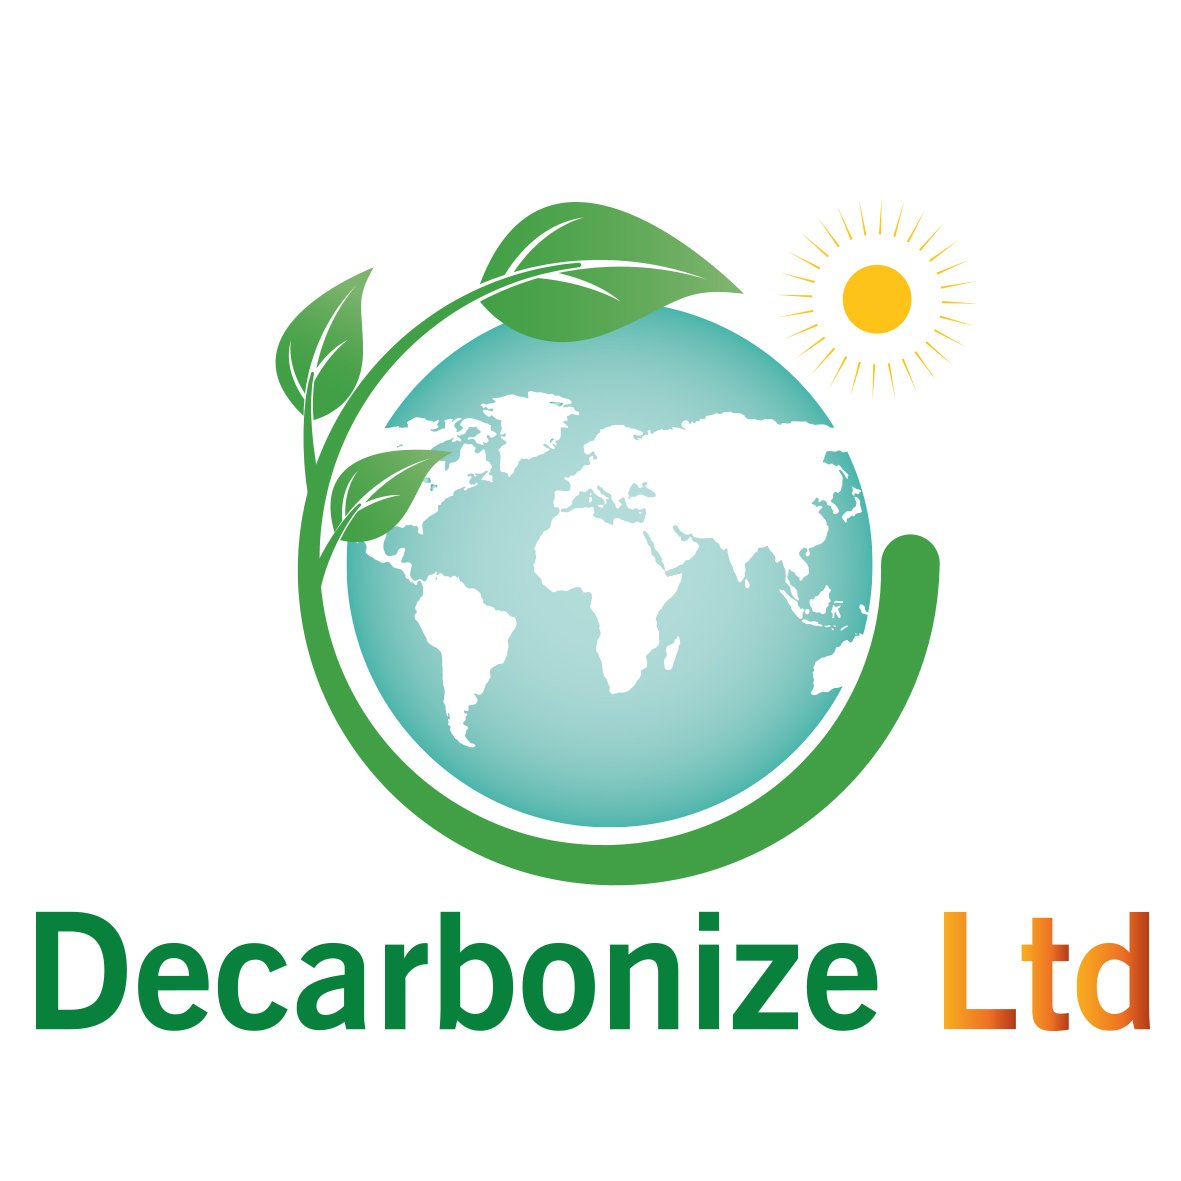 #Social enterprise
production, sale and distribution of sustainable #biomassbriquettes
To Order Call: 0722817020
Email: sales@decarbonizeenergy.com